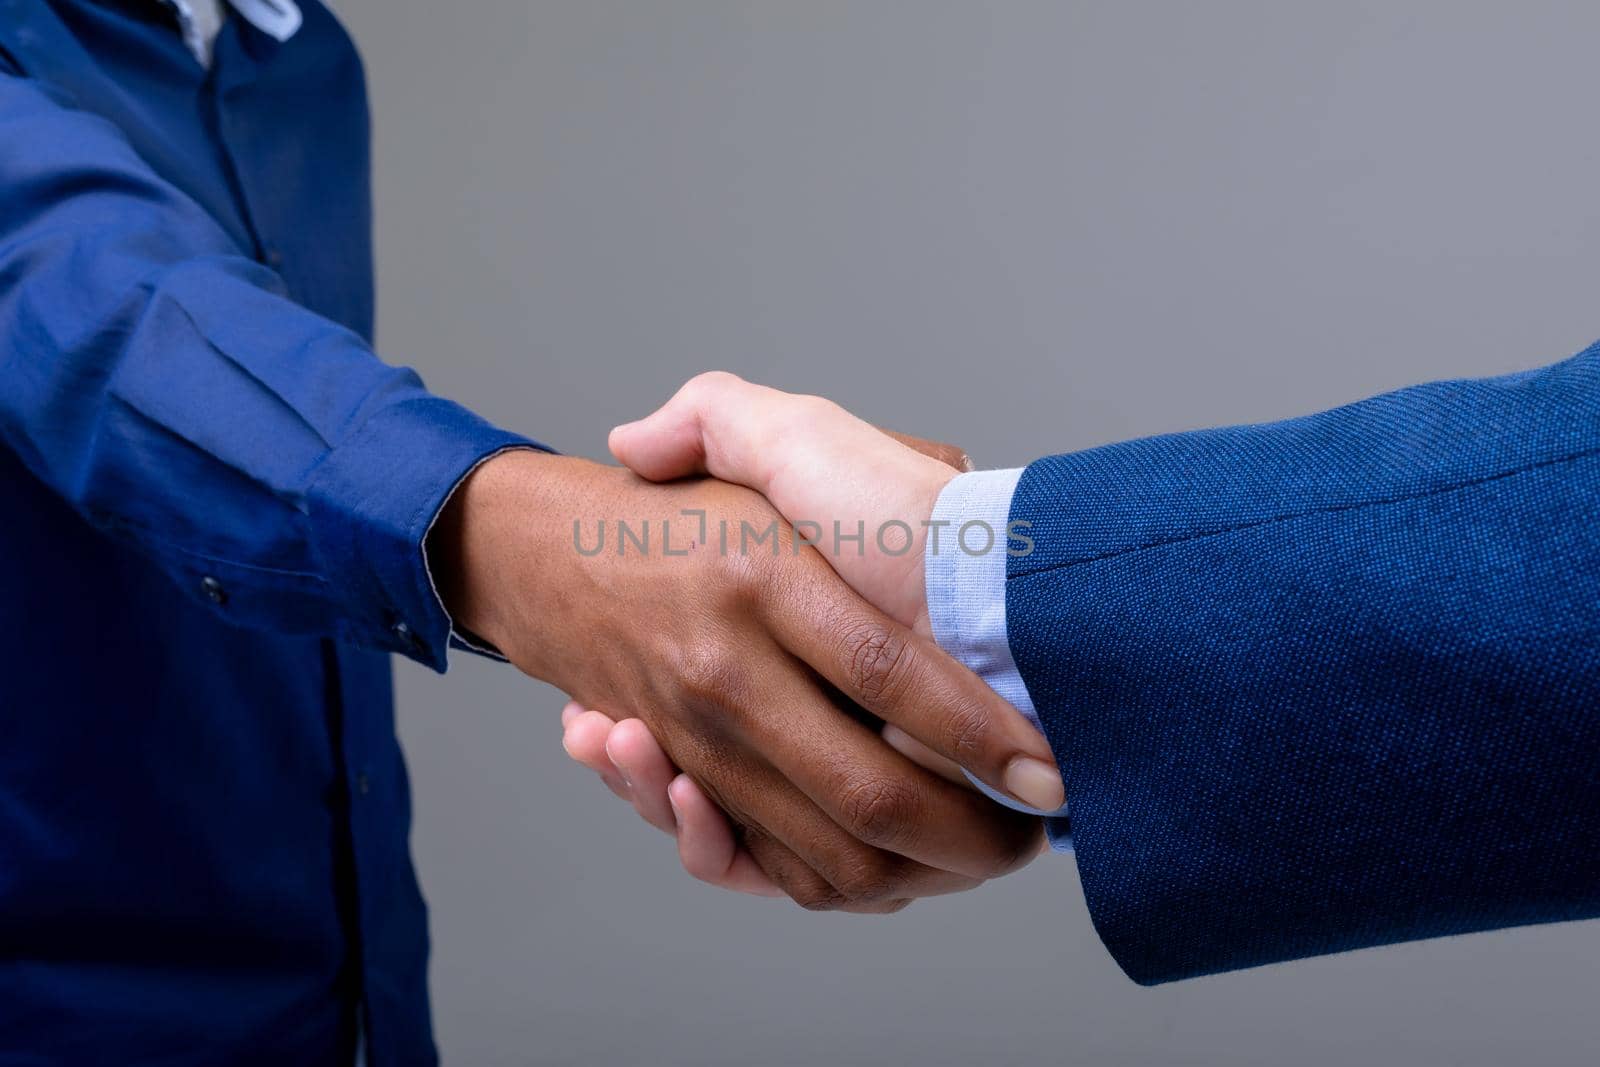 Caucasian and african american business people shaking hands, isolated on grey background. business technology, communication and growth concept.